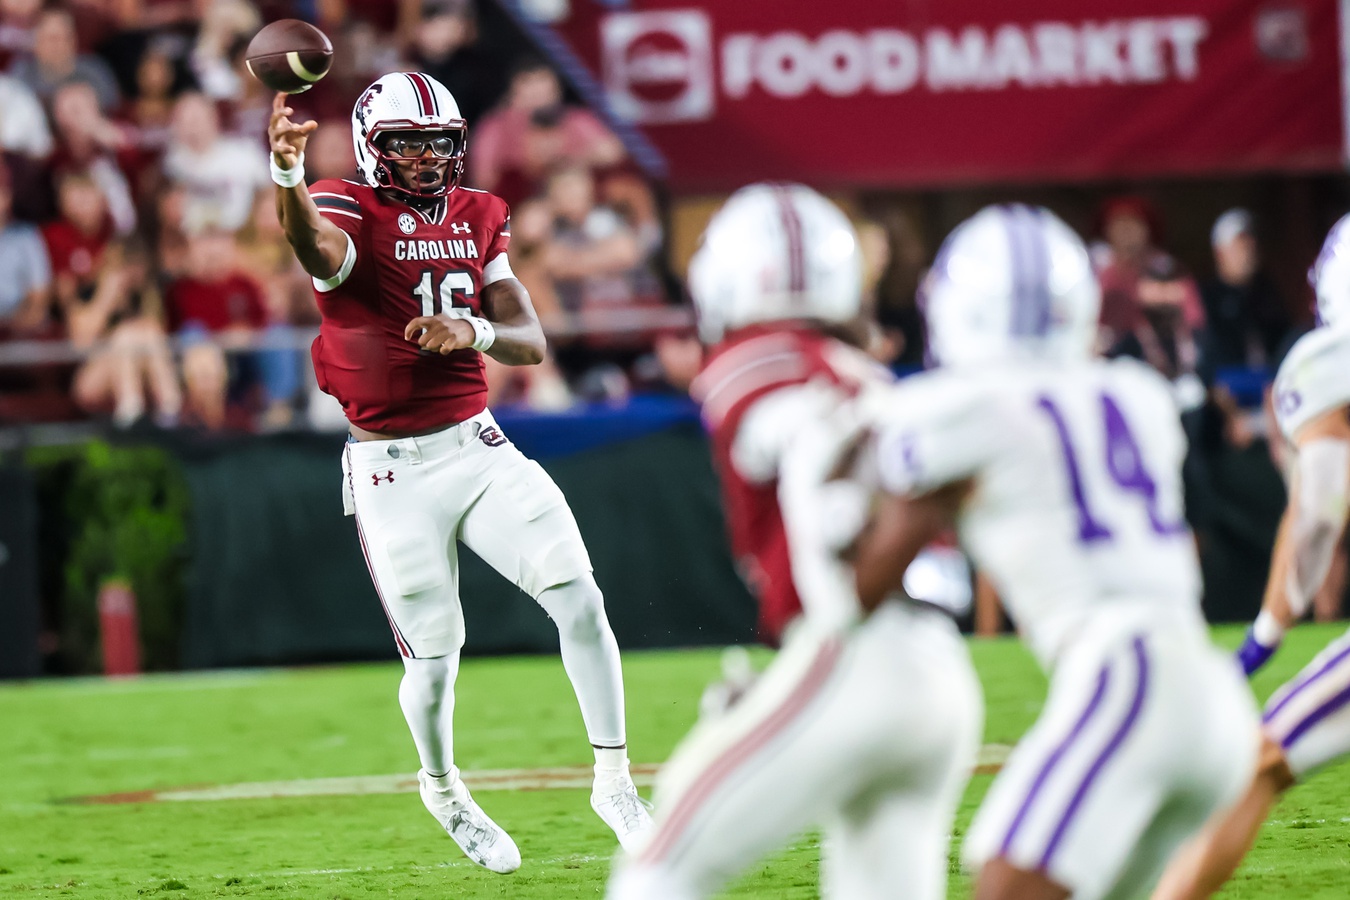 Gamecocks Spring Game: Key Players to Watch & Spring Game Details Revealed